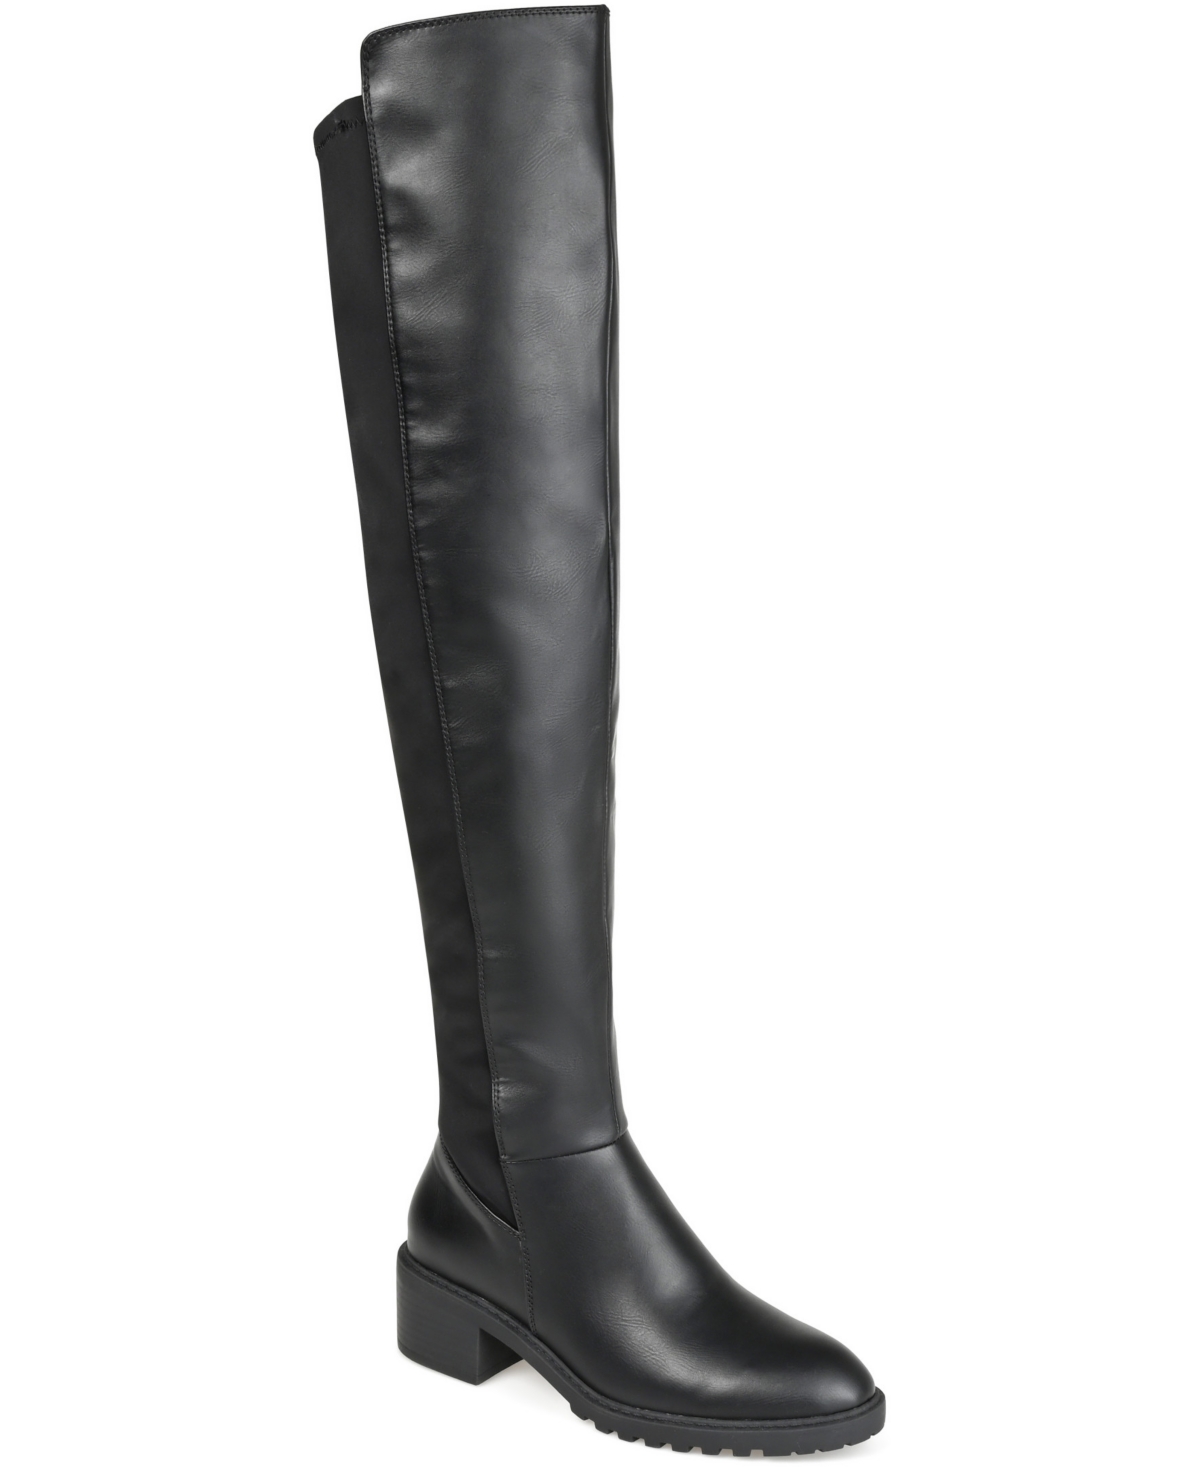 Women's Aryia Wide Calf Boots - Snake